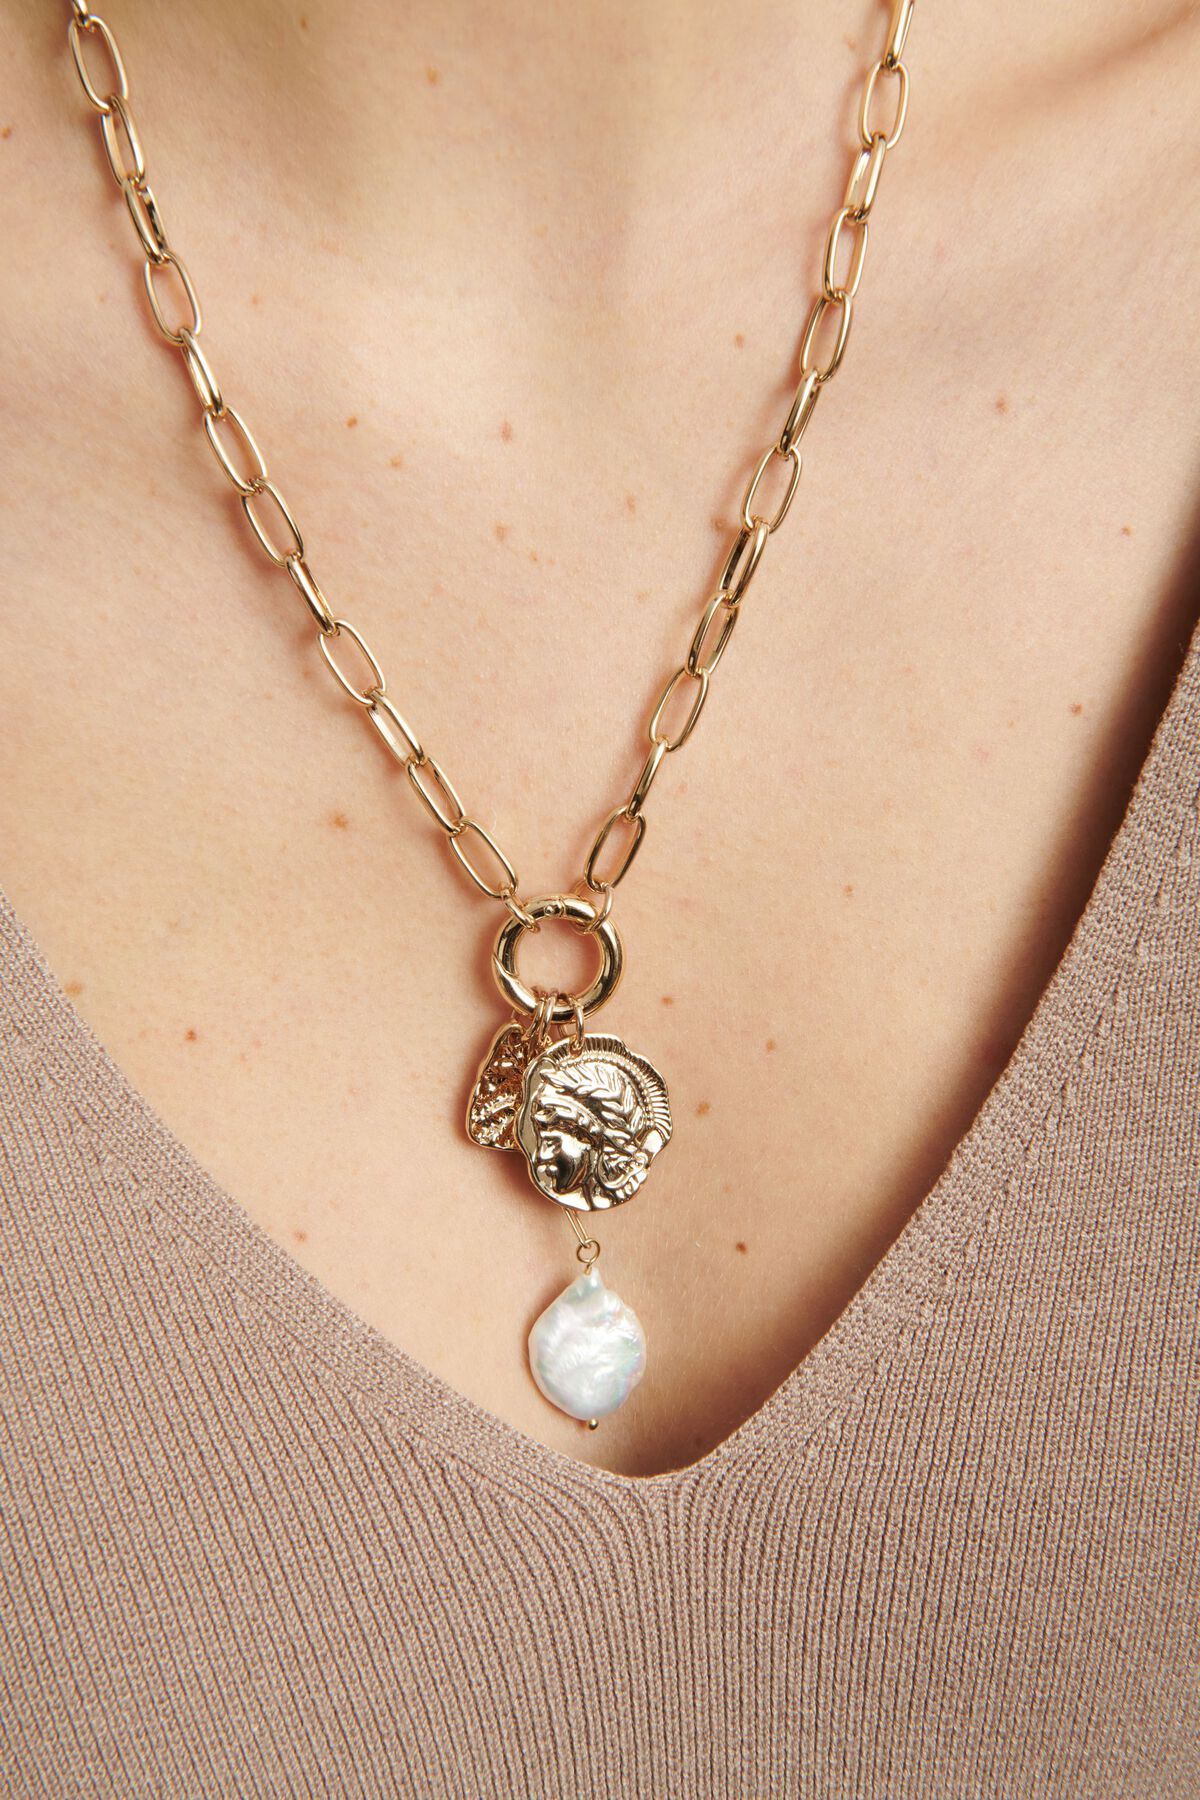 Dynamite Pearl, Medallion & Charm Necklace. 2